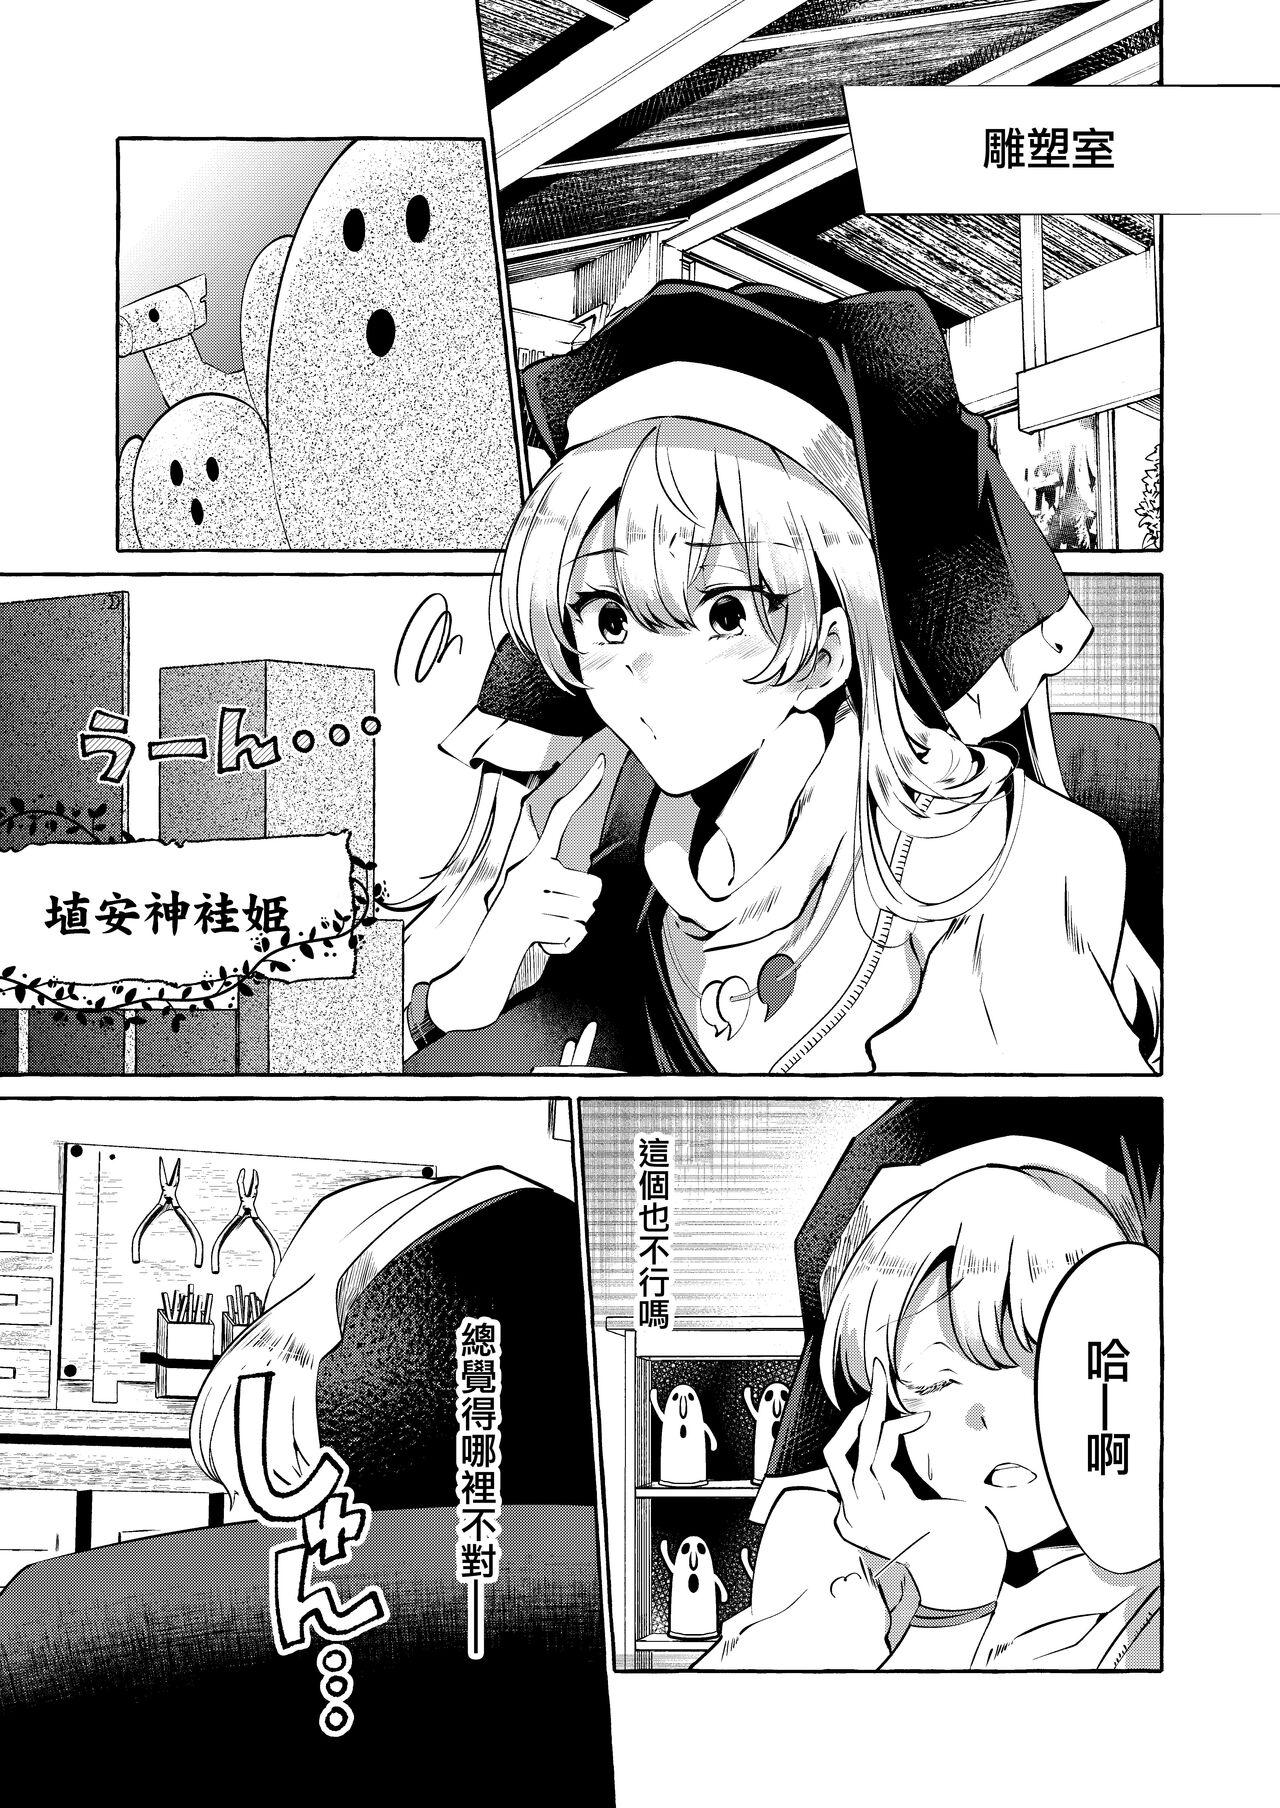 Brother 妄想に肢体を委ねて - Touhou project Real Amature Porn - Page 2